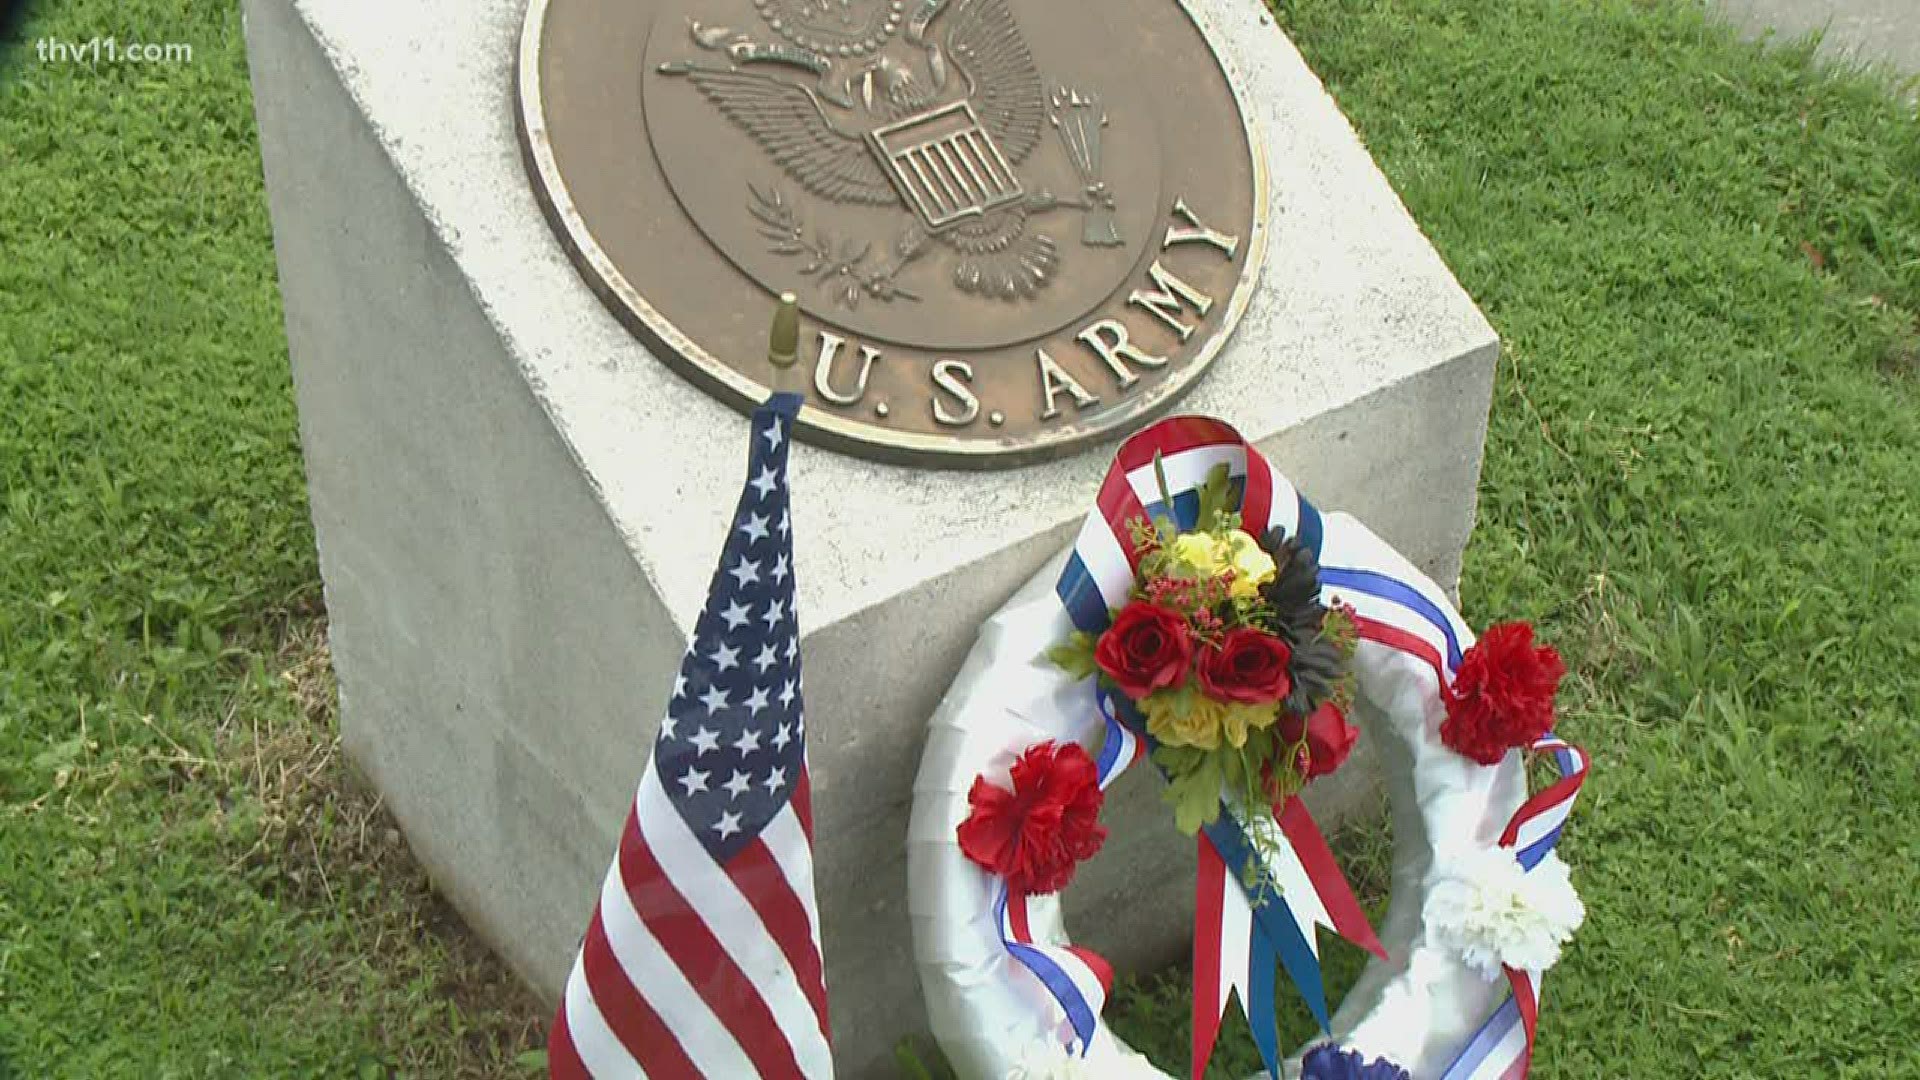 Governor Asa Hutchinson honored the men and women who fought for our freedom by laying wreaths at the Arkansas State Veterans Cemetery.